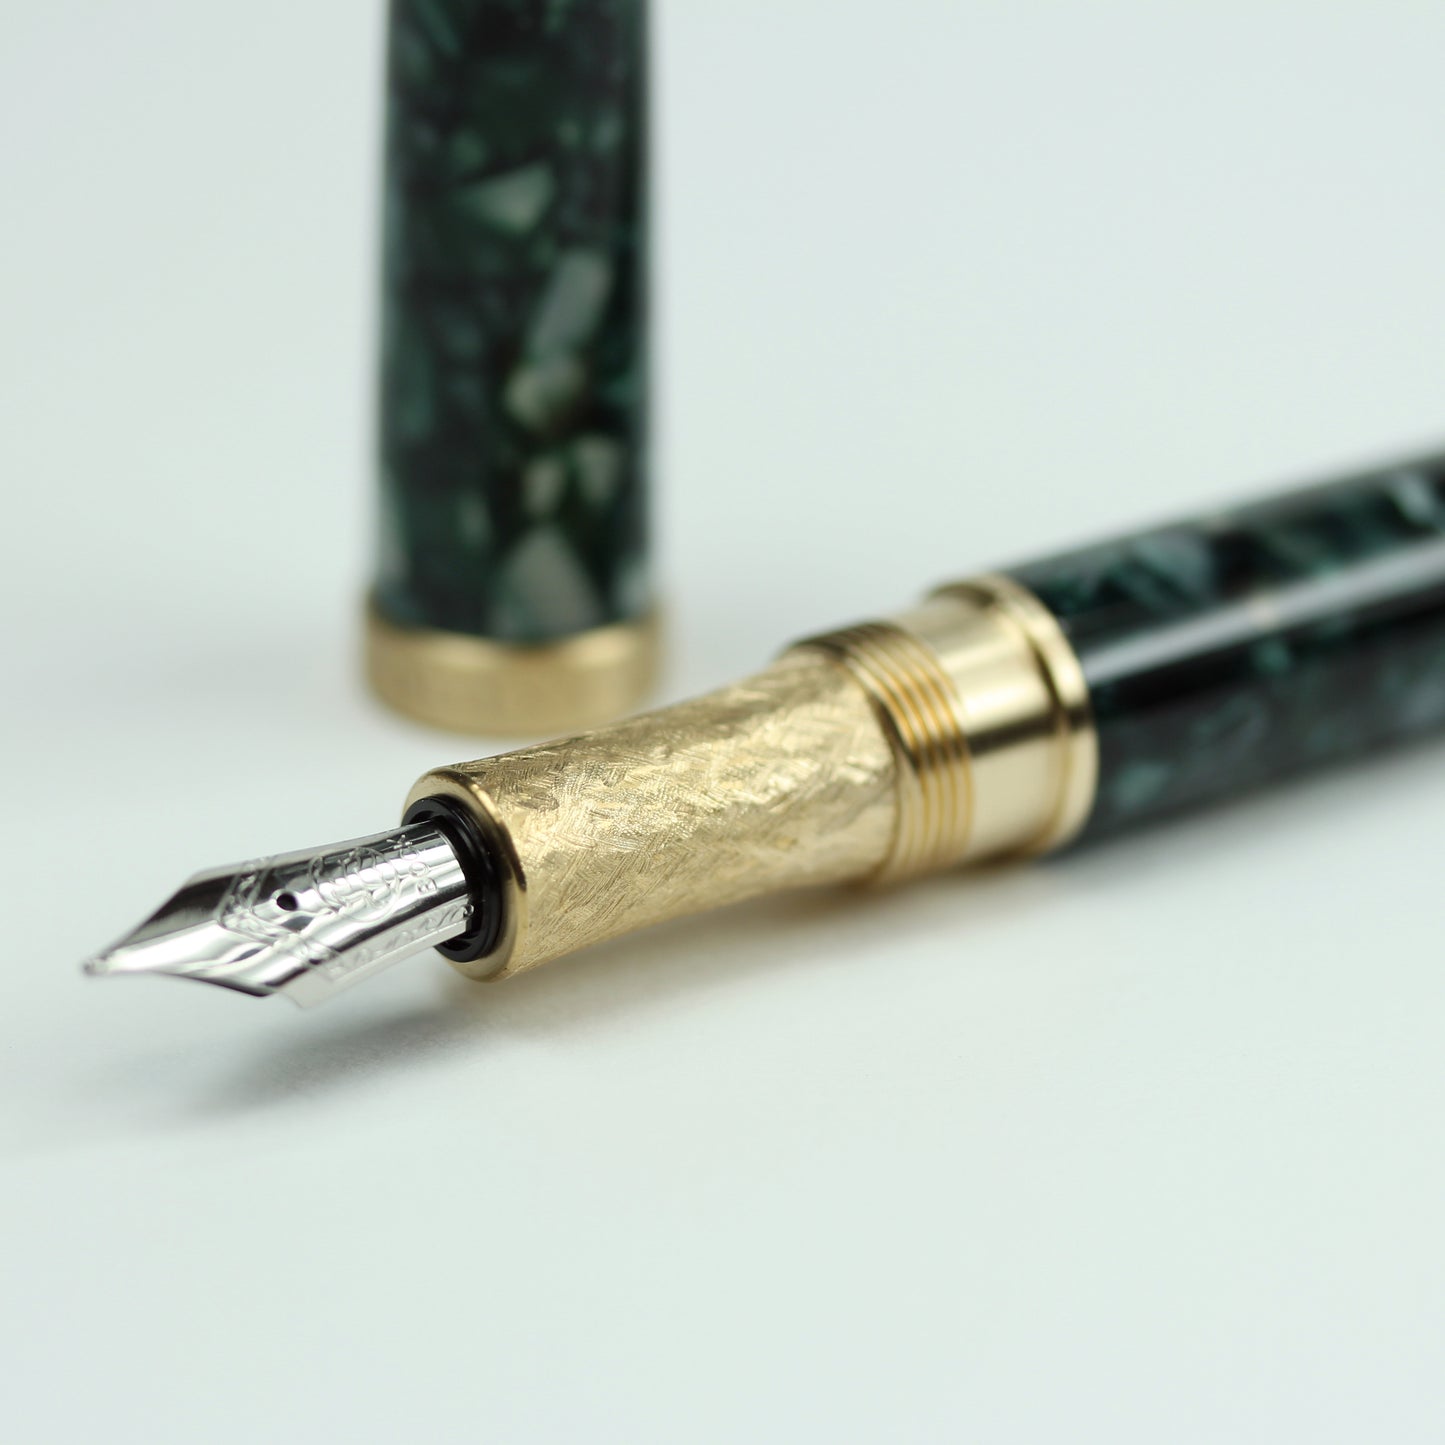 Model 1. Esquire Emerald Green Acrylic Fountain Pen with Brass Accents